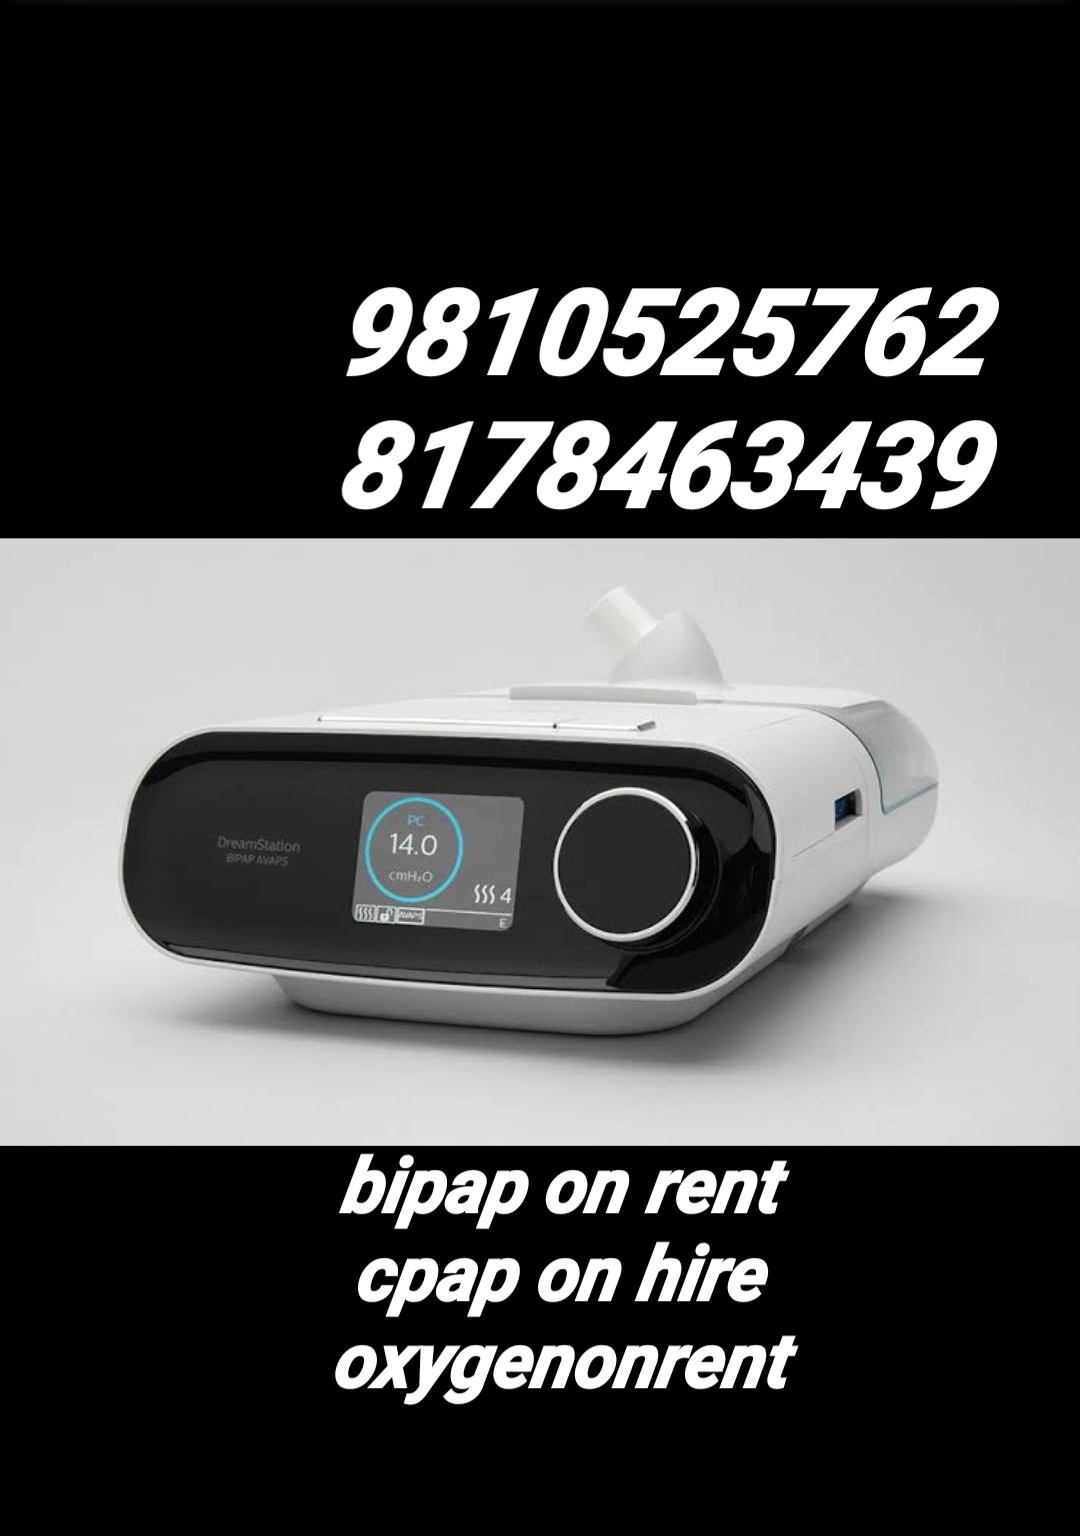 autocpap machine on rent in greater noida 8178463439